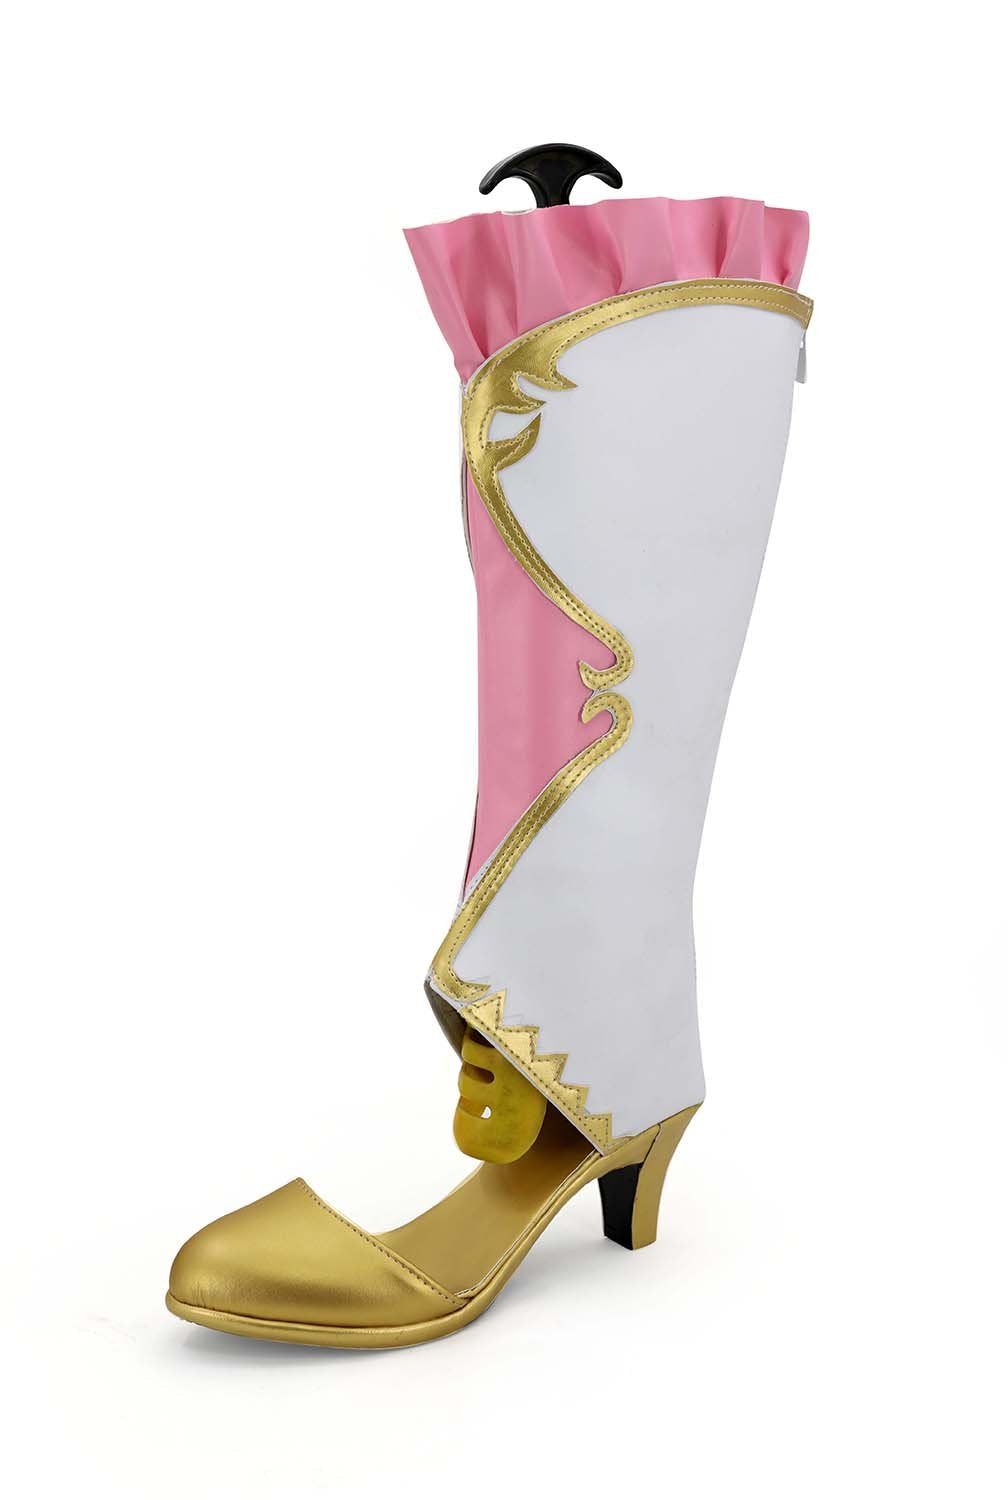 LoveLive! Umi Sonoda Birthstone Boots Cosplay Shoes